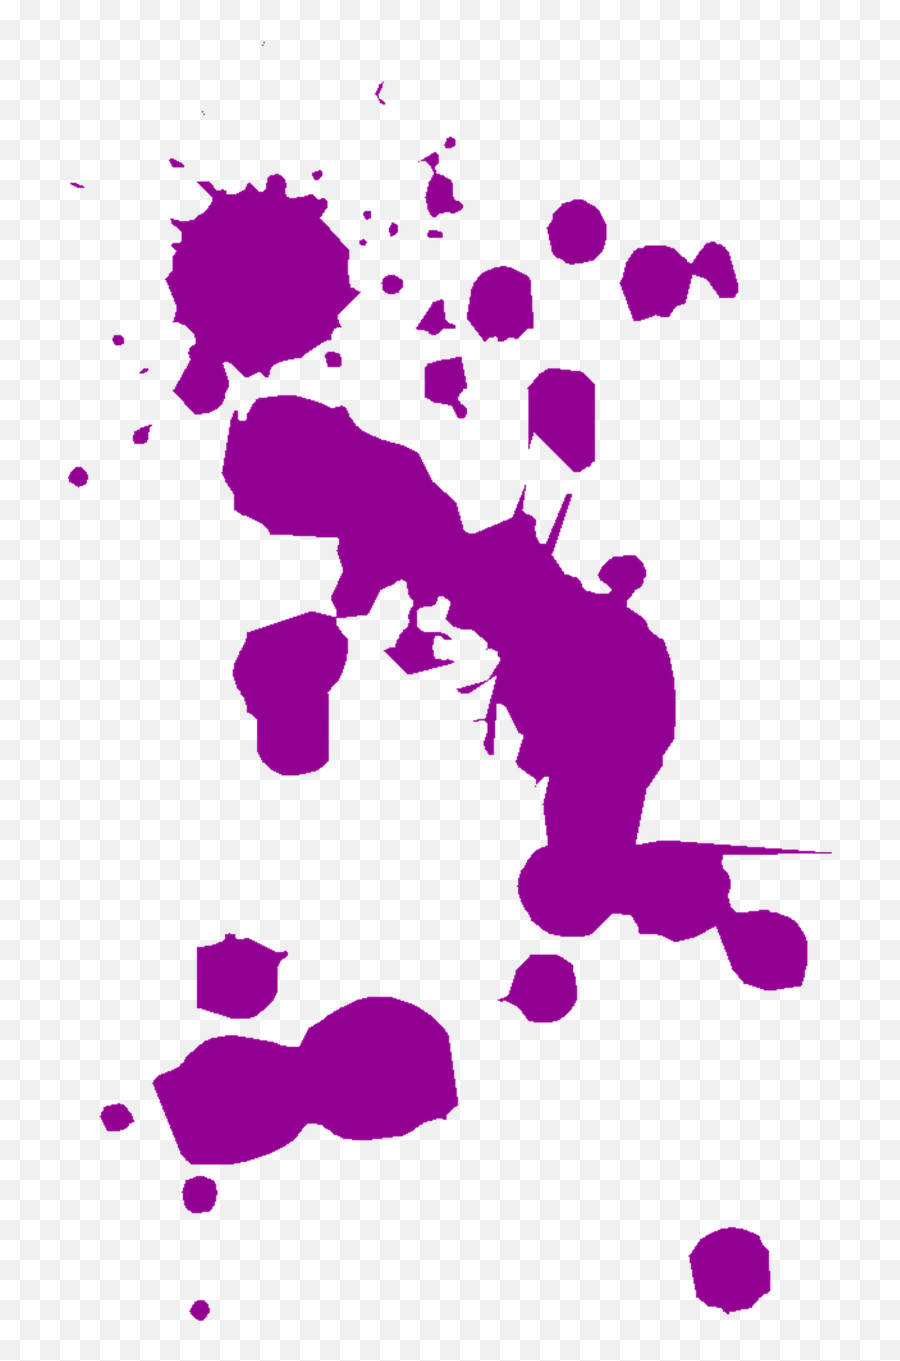 Download Vector Spots Png Image With No Background - Pngkeycom Purple Paint Drops,Spots Png